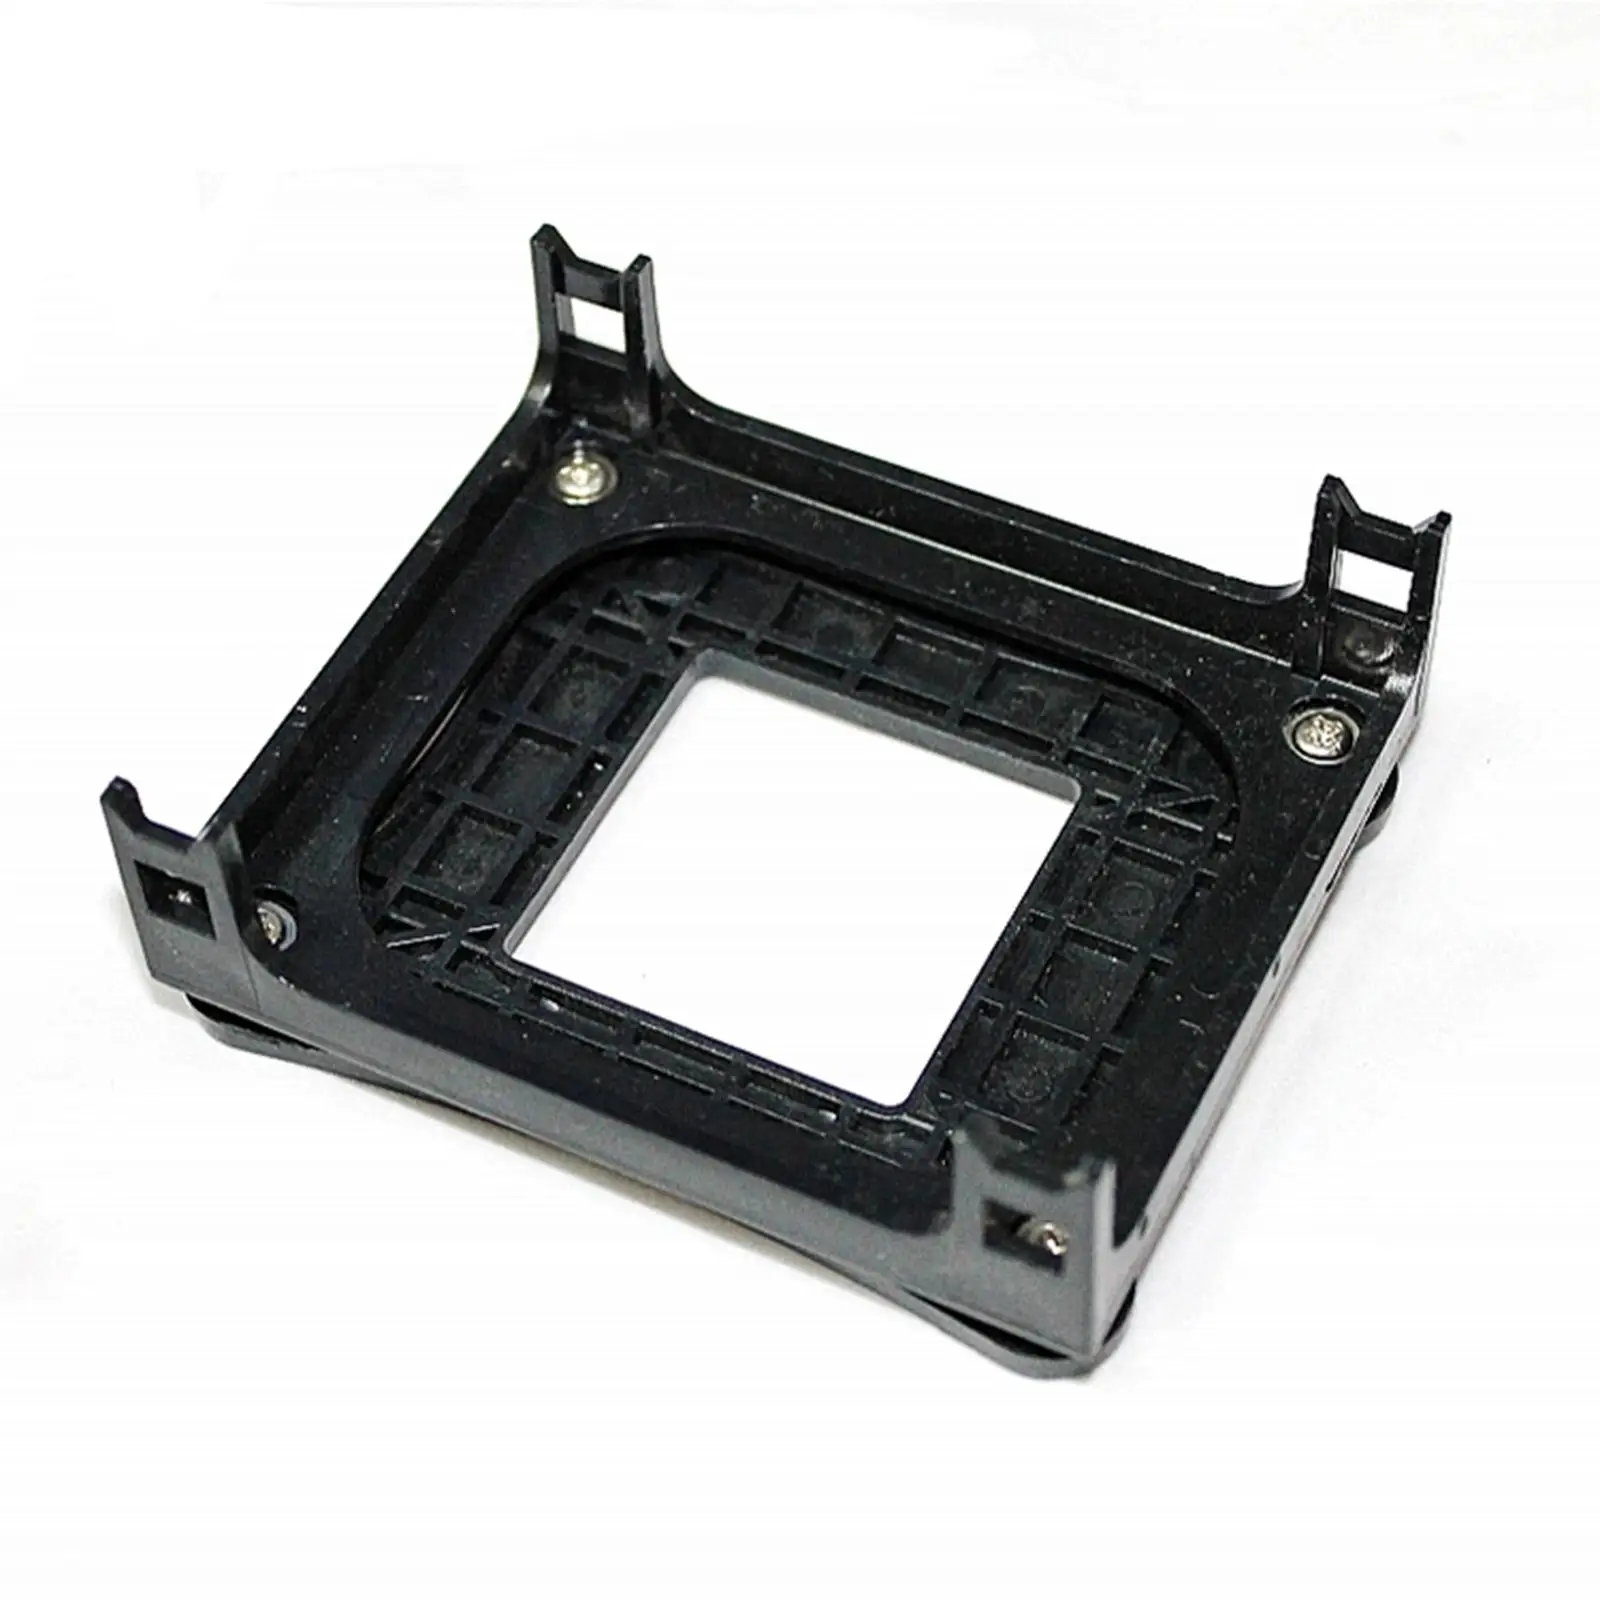 Cooler Master CPU Cooling Fan Screw-Mounting Bracket and Back Plate for Socket 478 Motherboard 